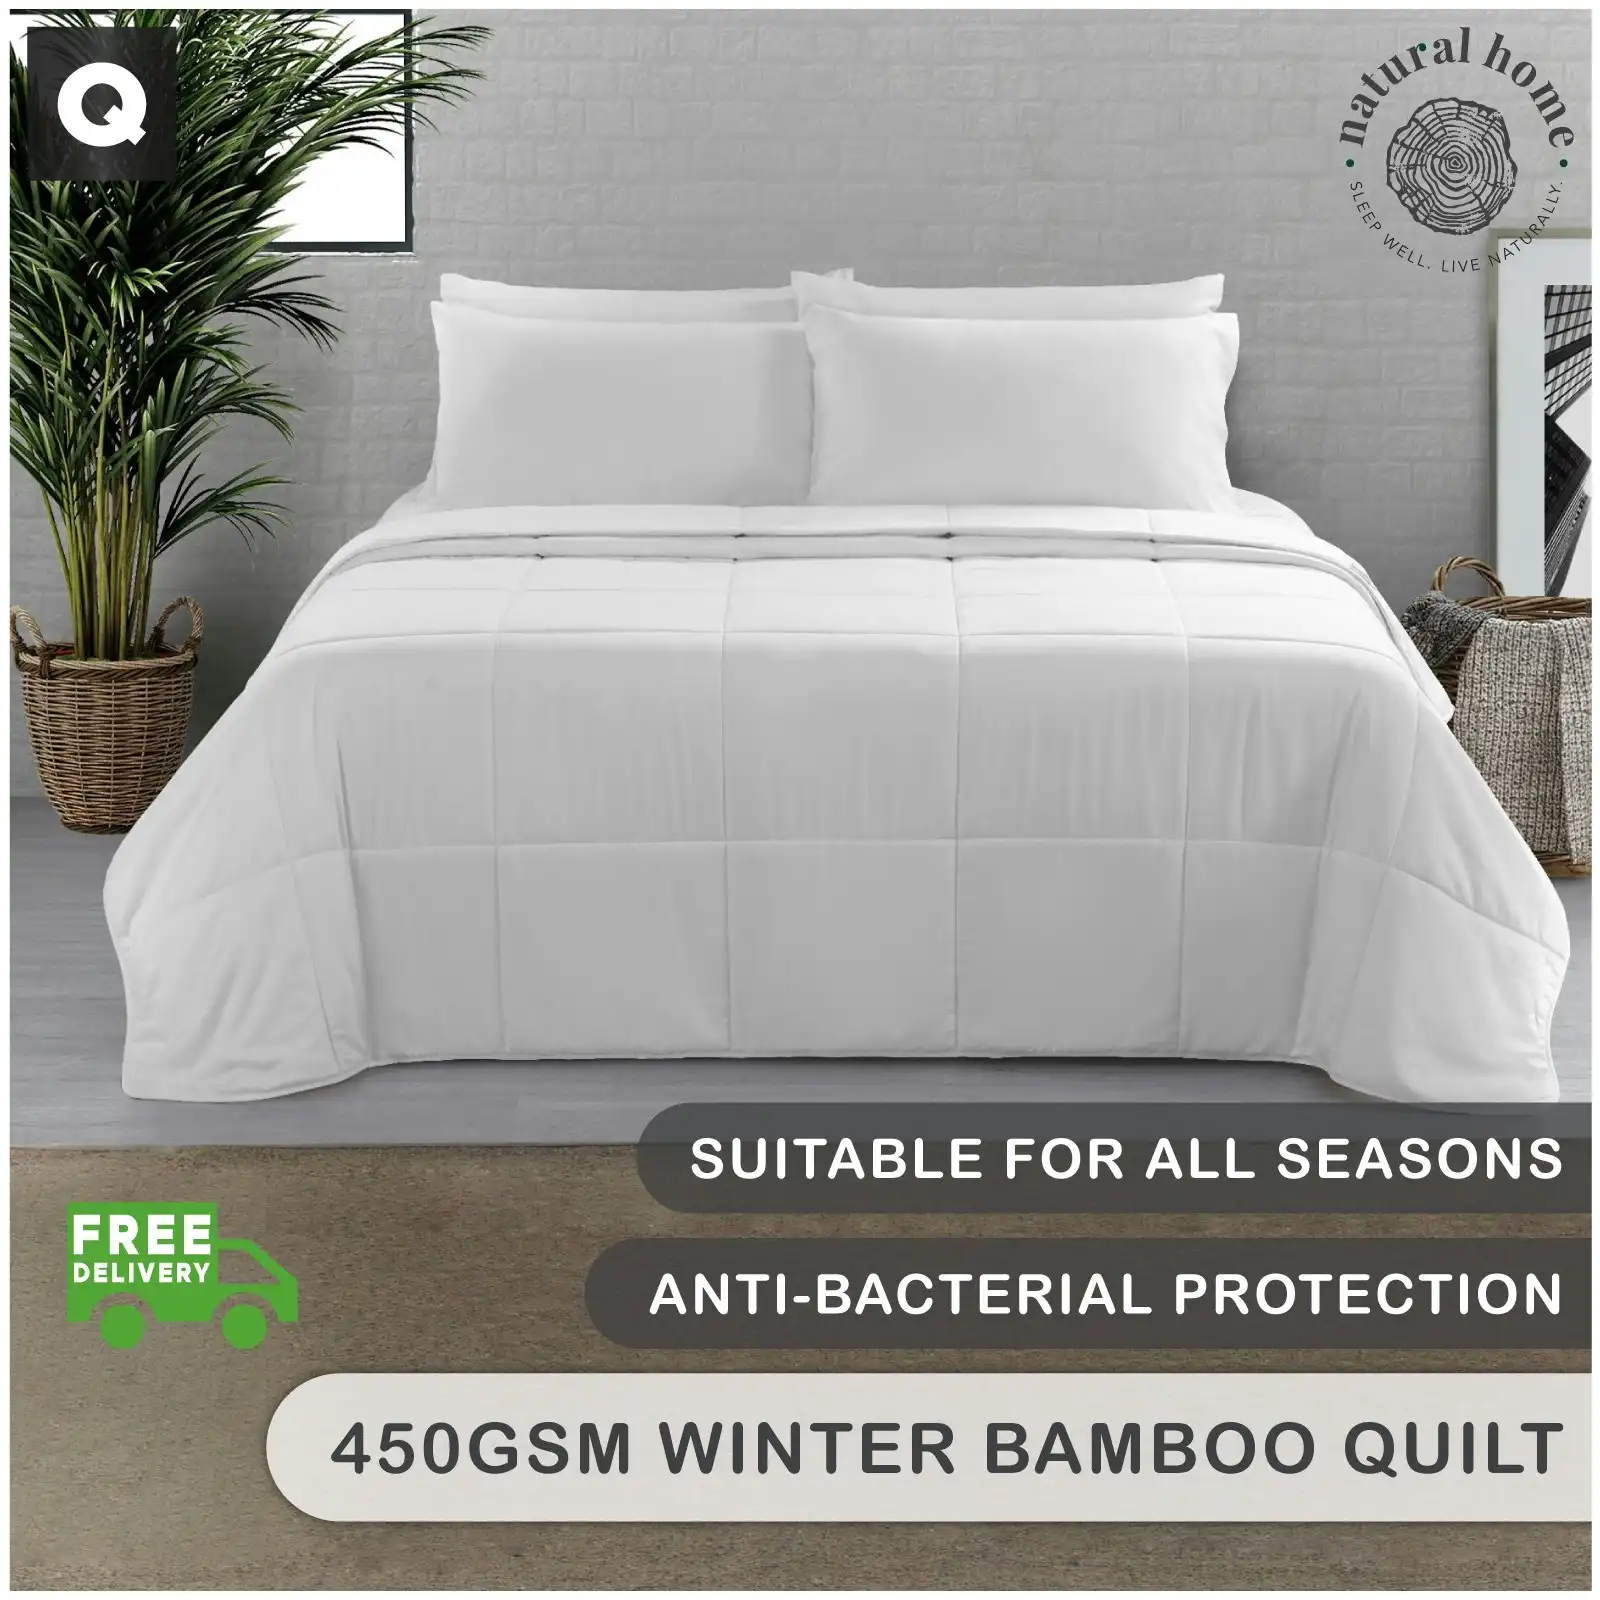 Natural Home Winter Bamboo Quilt 450gsm - White - Queen Bed